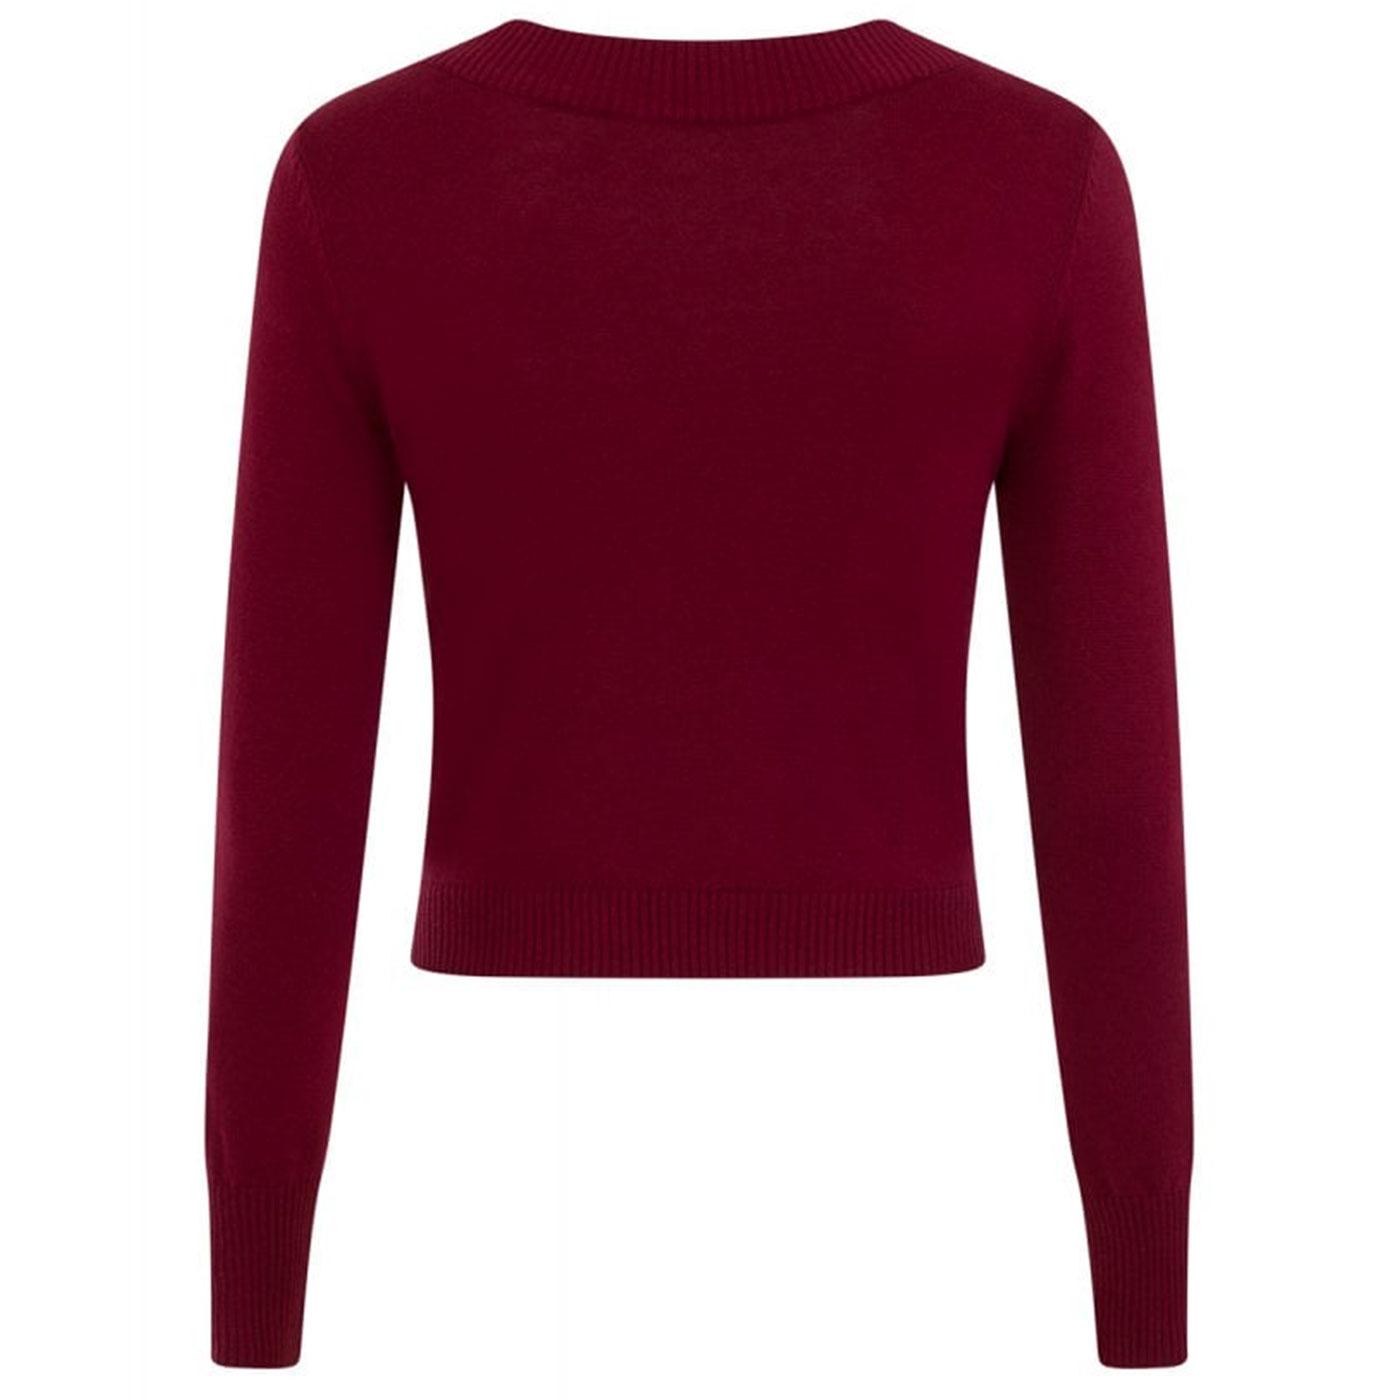 COLLECTIF Tracy Keyhole Retro Vintage 50s Jumper in Wine